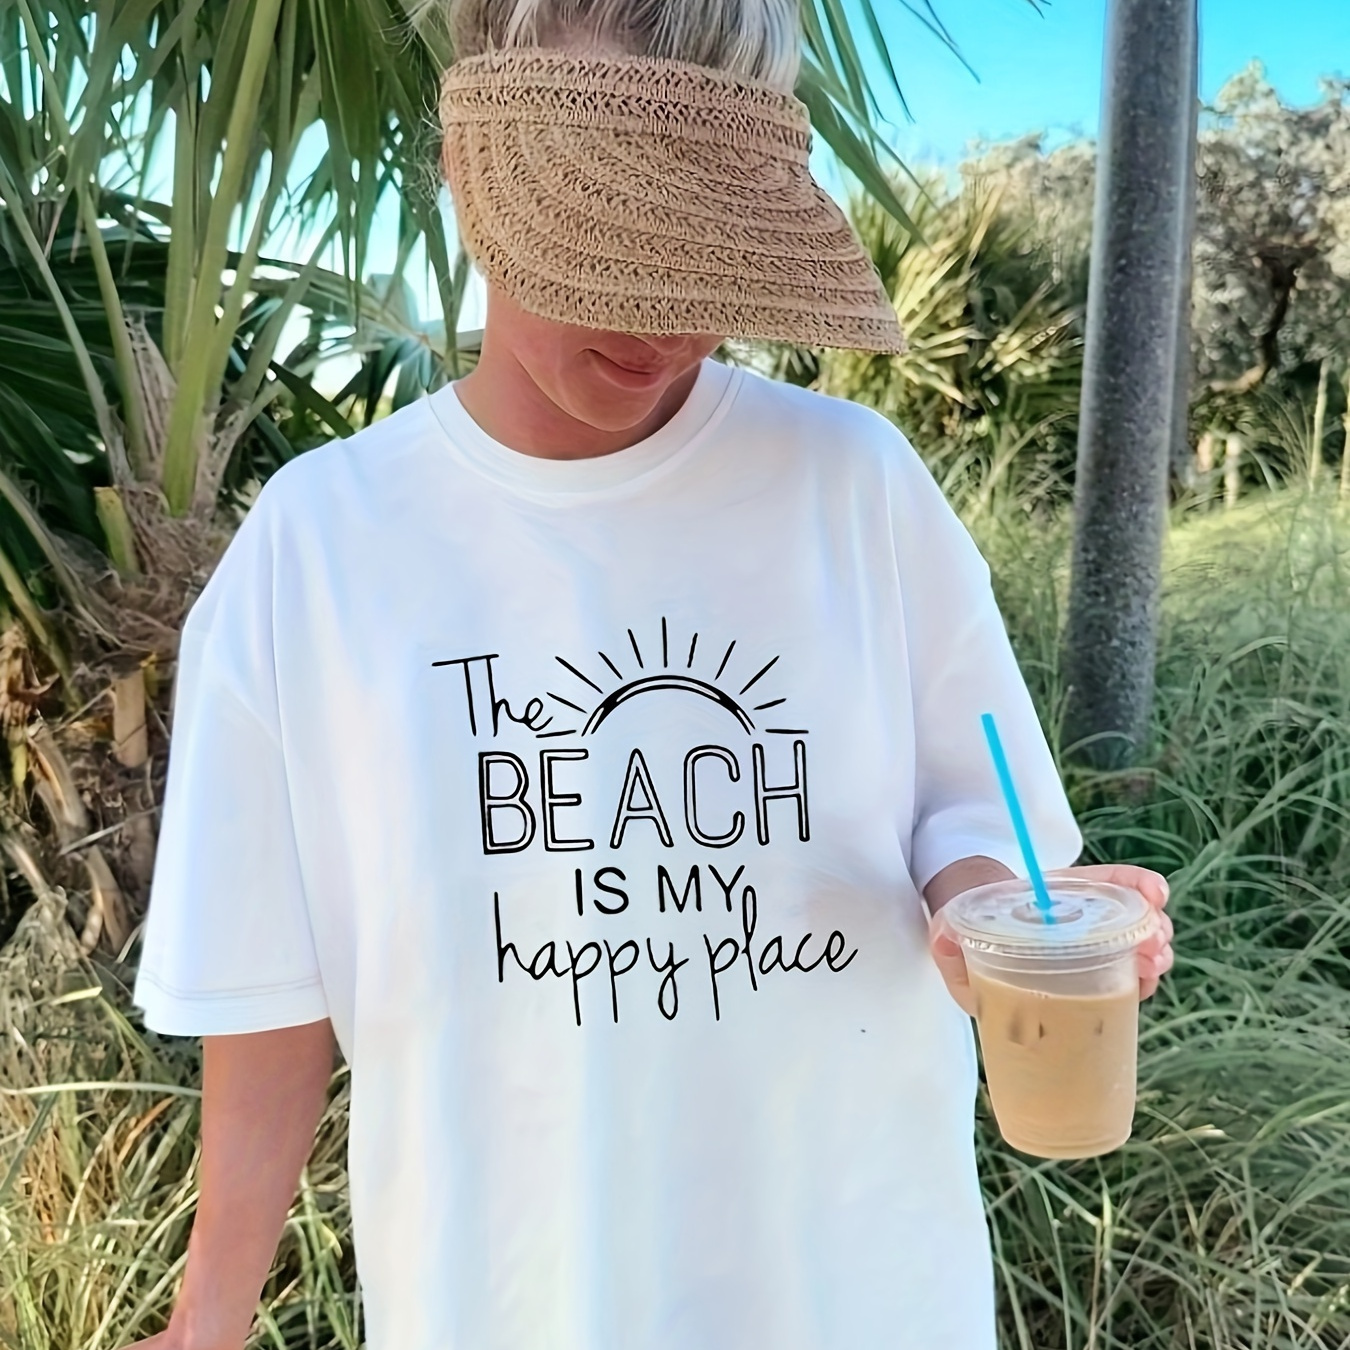 

The Beach Is My Happy Place Print T-shirt, Short Sleeve Crew Neck Casual Top For Summer & Spring, Women's Clothing